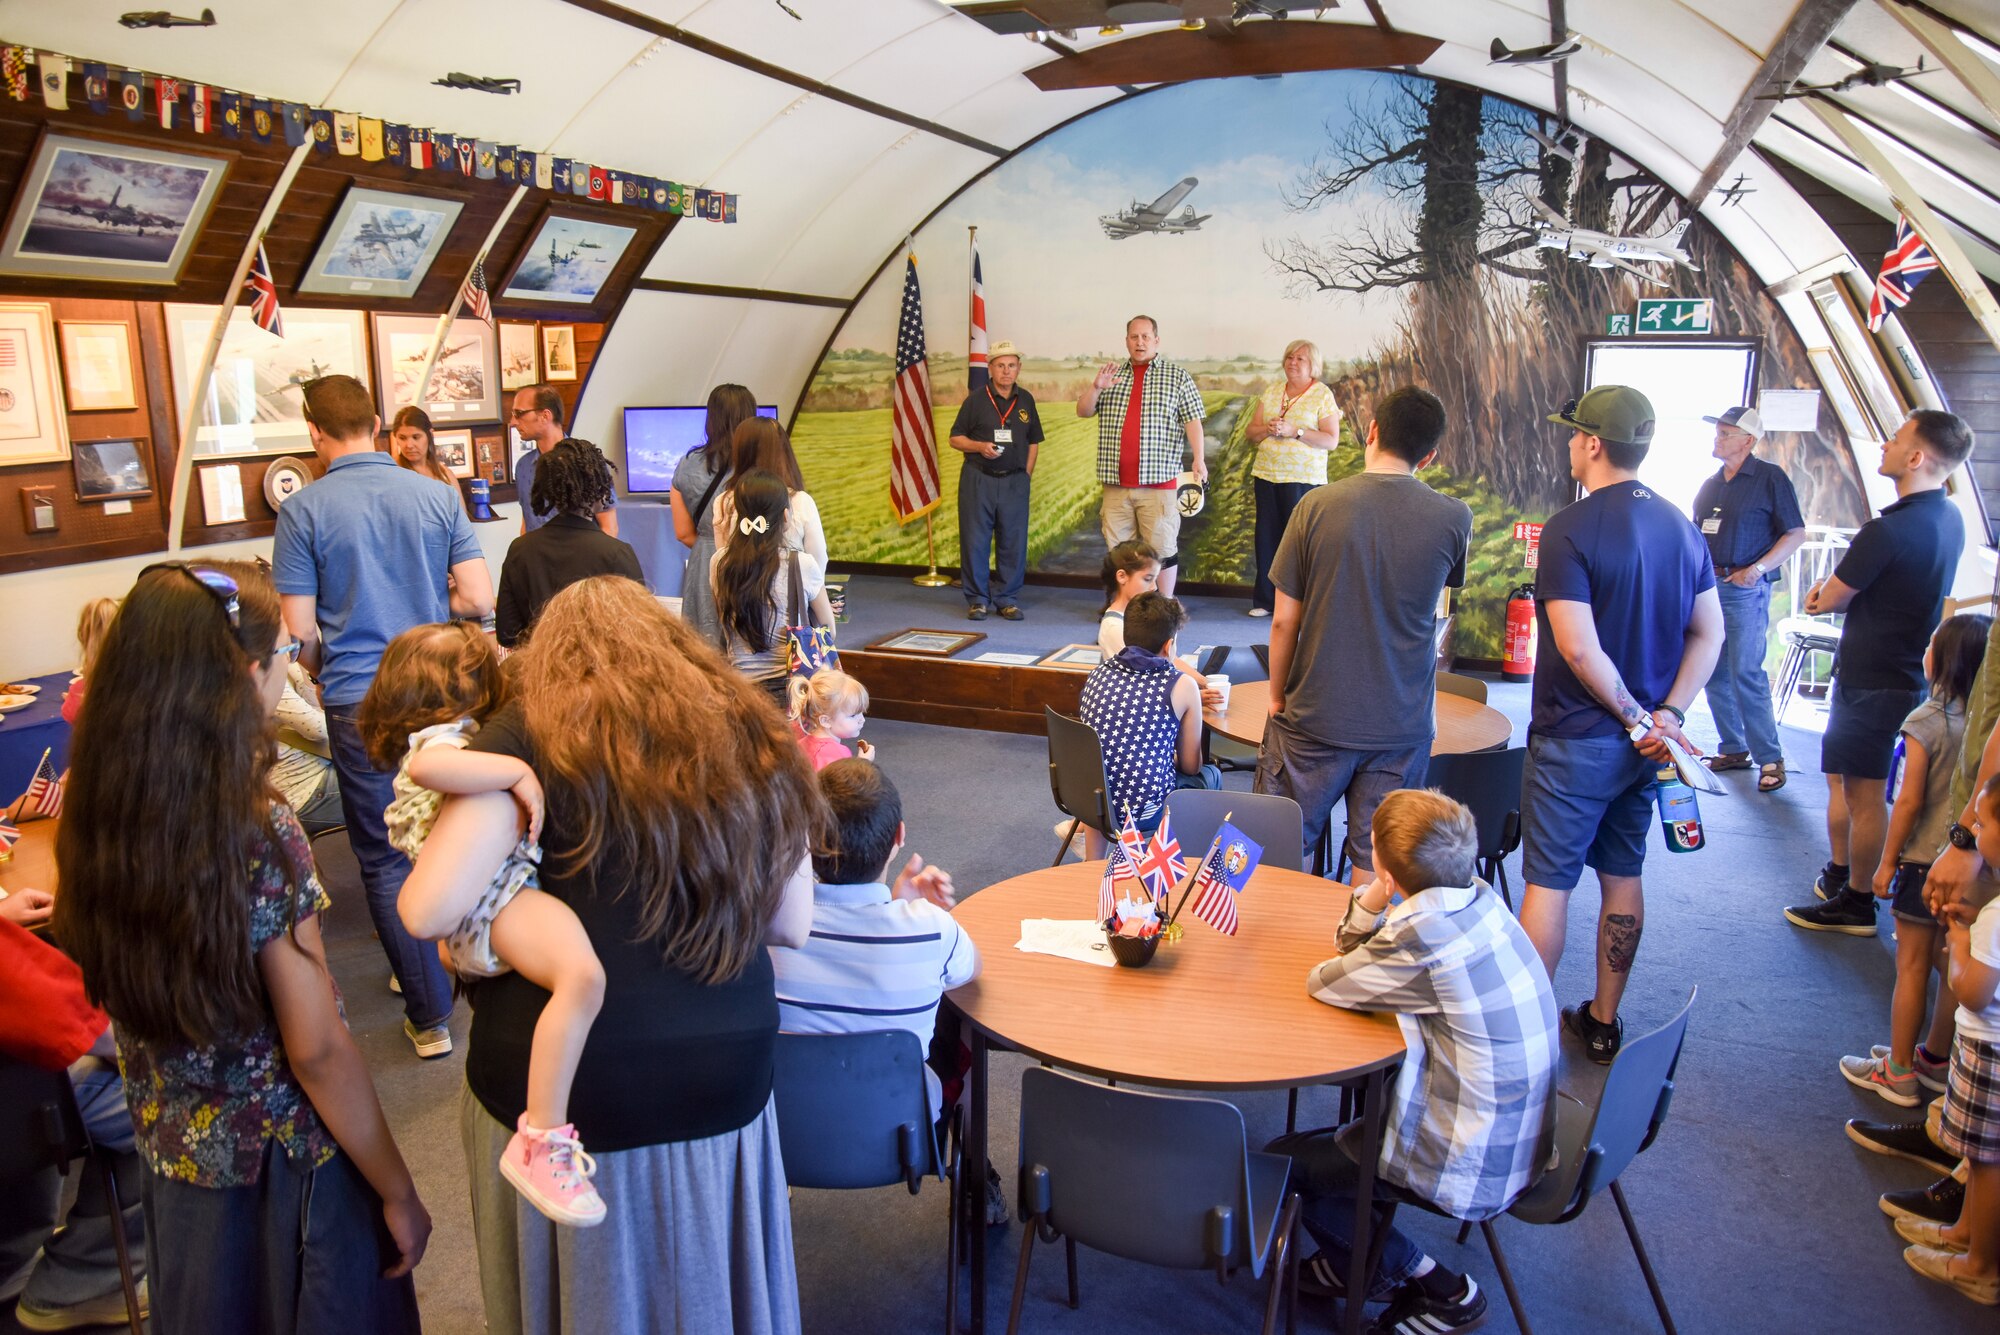 Robert Mackey, 100th Air Refueling Wing Historian welcomes Airmen from the 100th Air Refueling Wing Wing Staff Agency to 100th Bomb Group Memorial Museum at Diss, England, June 26, 2018. Airmen from the base spent the day learning about the military heritage history while visiting the 100th BG Memorial Museum and the Norfolk and Suffolk Aviation Museum.  (U.S. Air Force photo by Senior Airman Christine Groening)